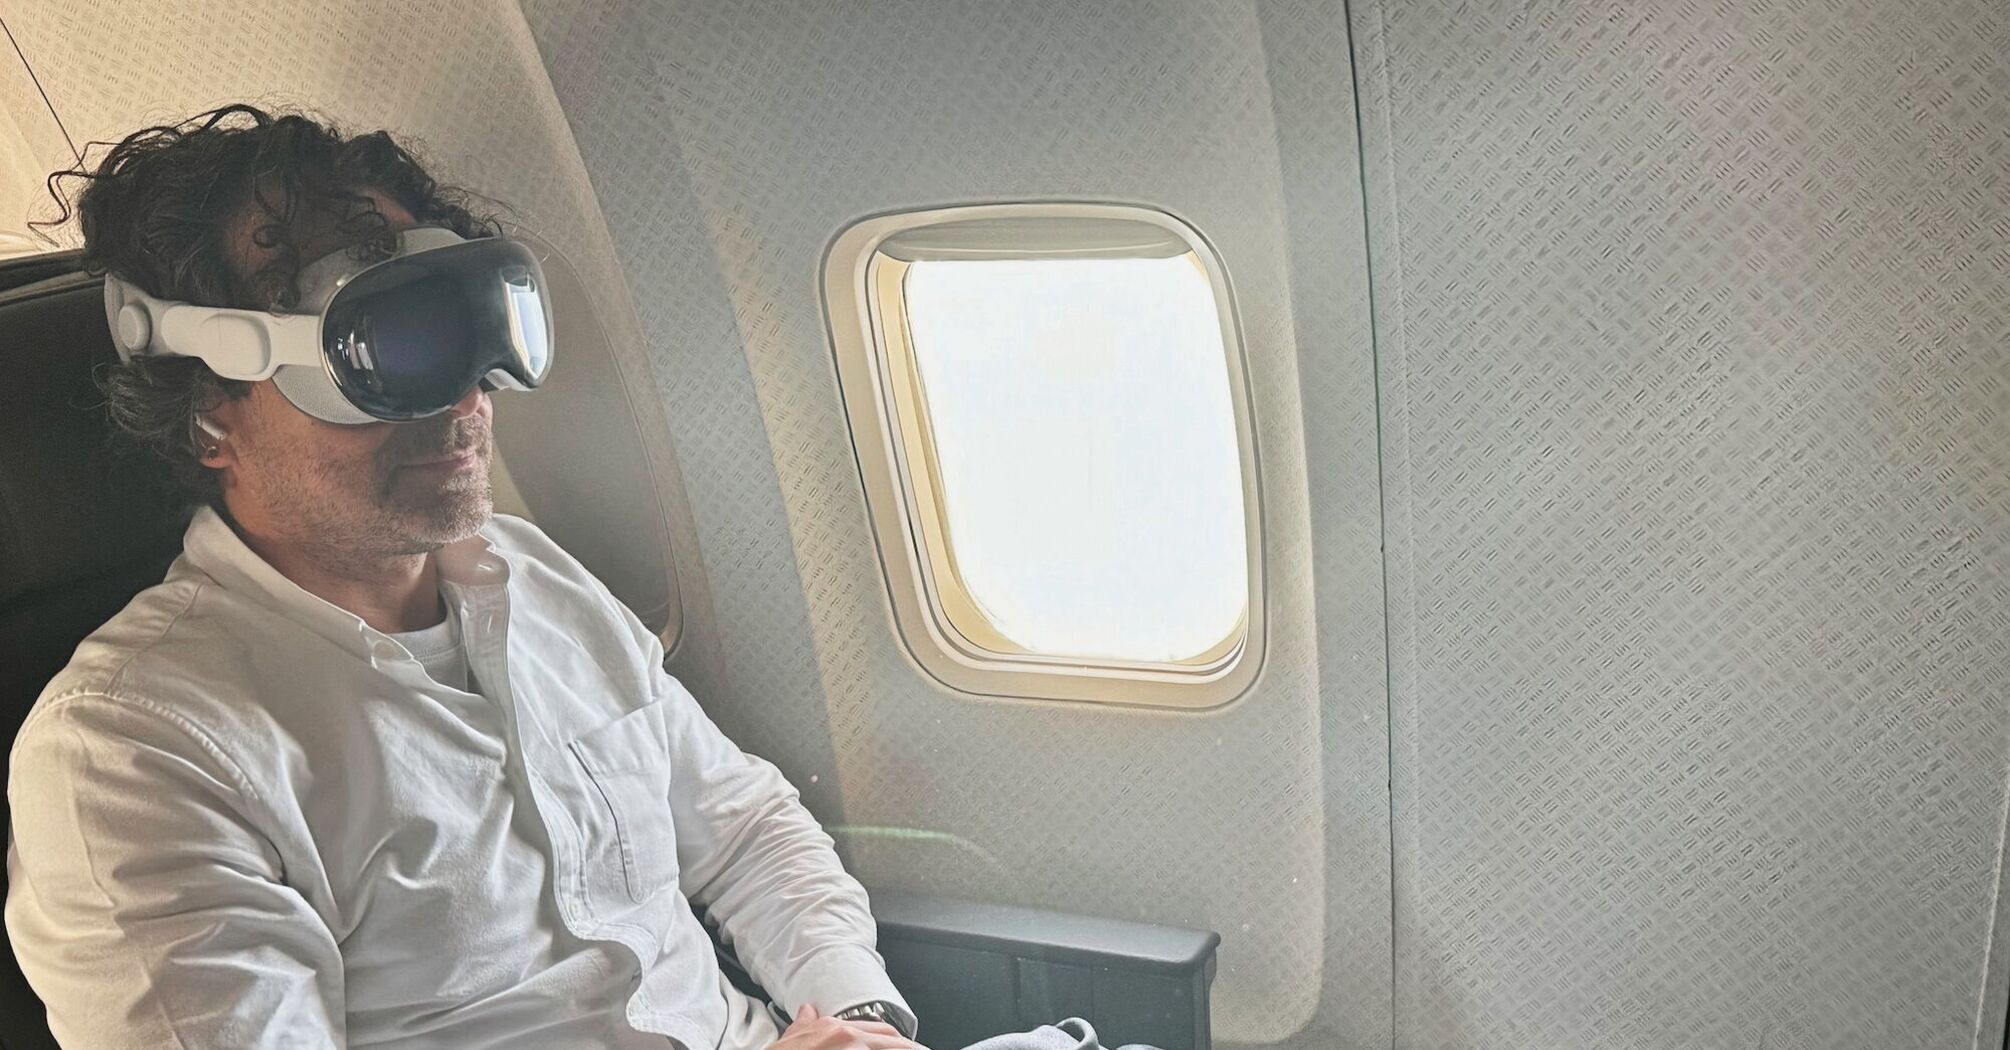 Passengers who tried the Apple Vision Pro glasses during the flight are no longer willing to travel without them